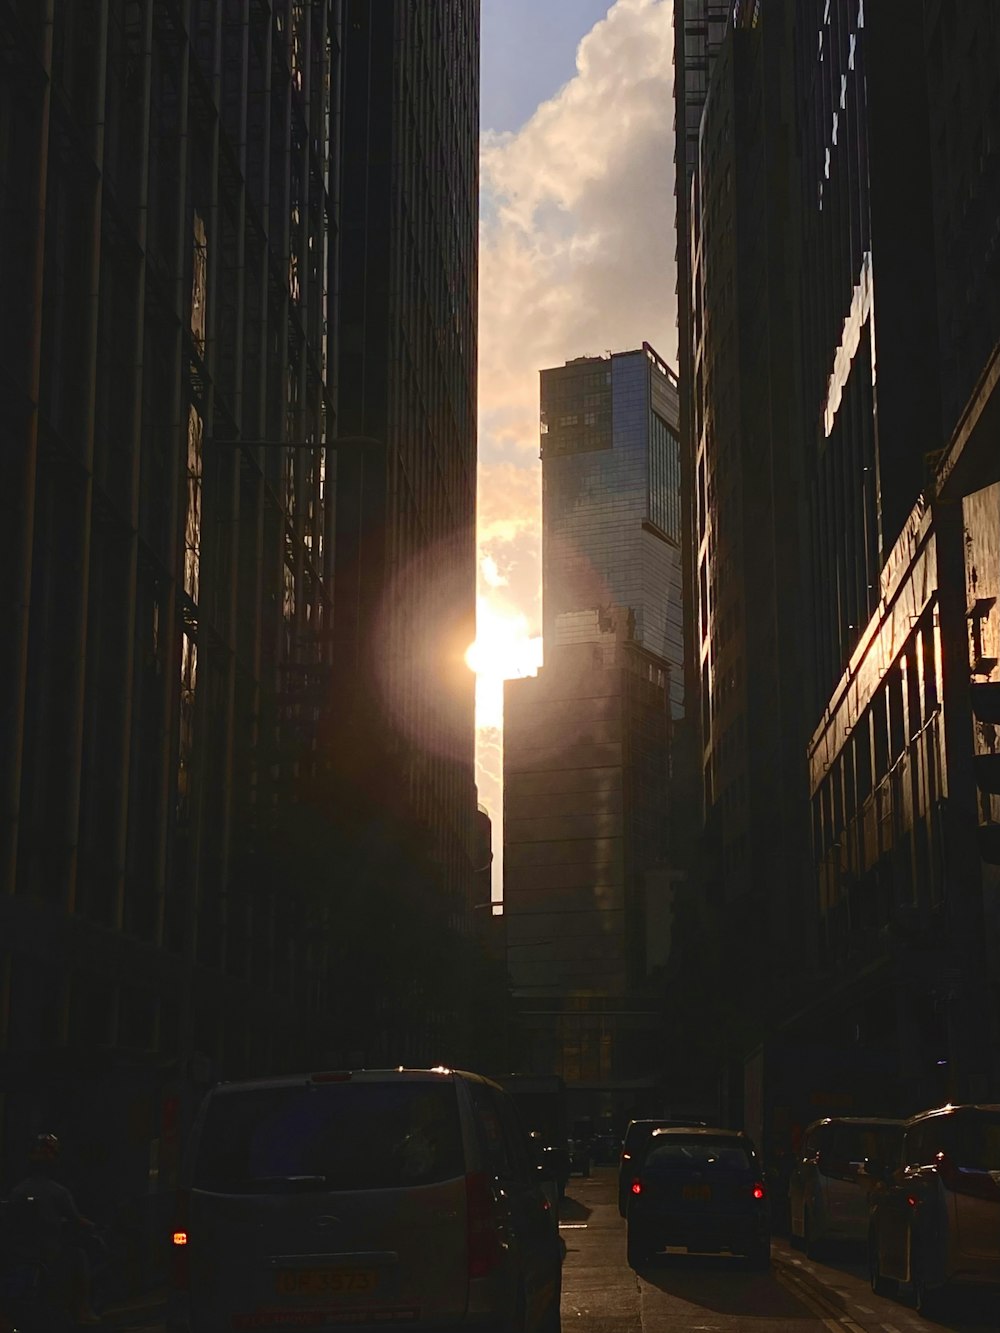 the sun is setting in a city with tall buildings